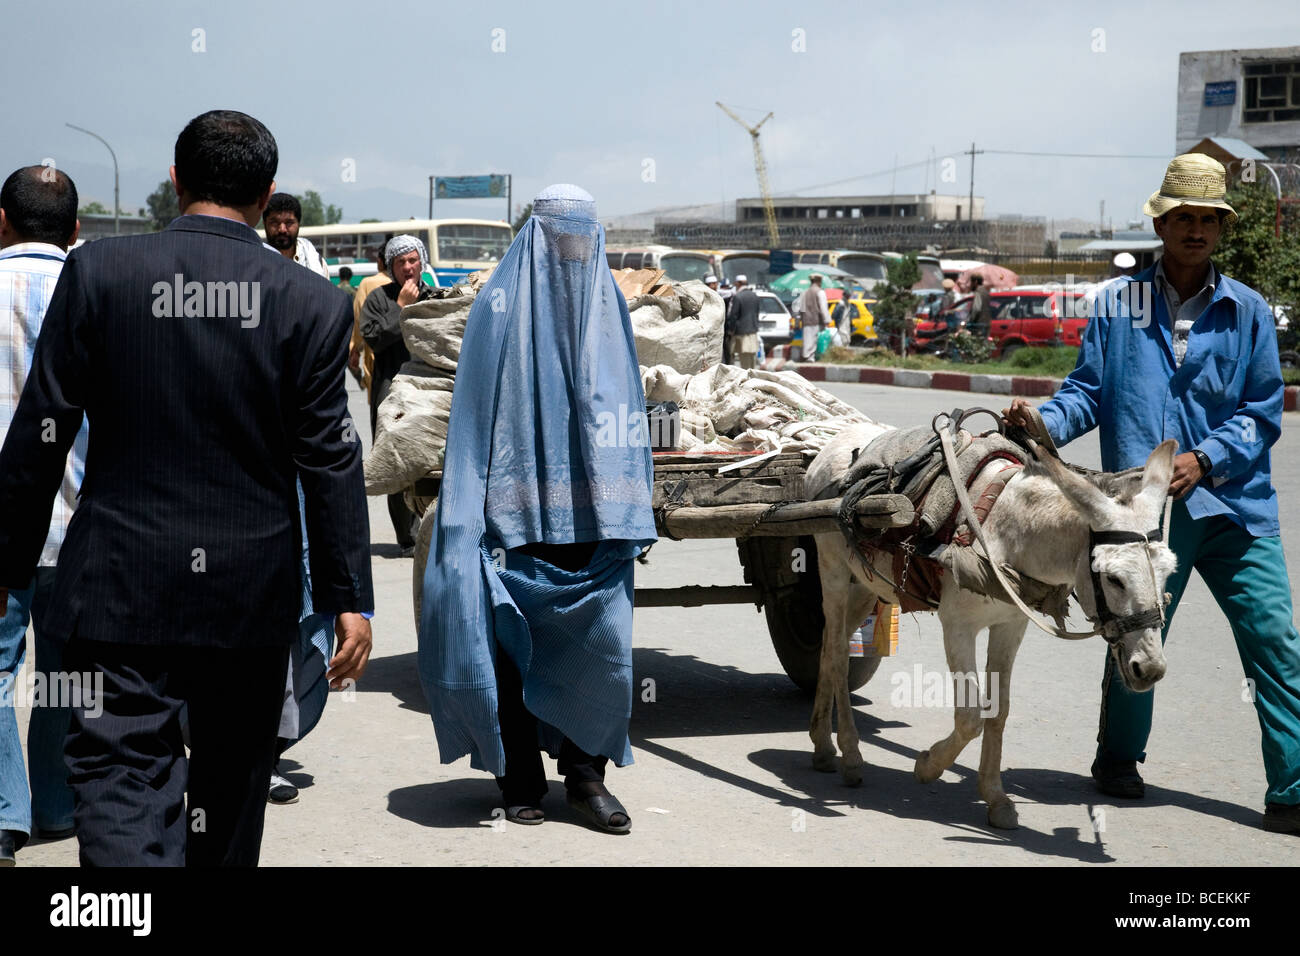 A mix of clothes and cultures from business suit to blue burqa to donkey cart in a busy Kabul street, Afghanistan's capital Stock Photo